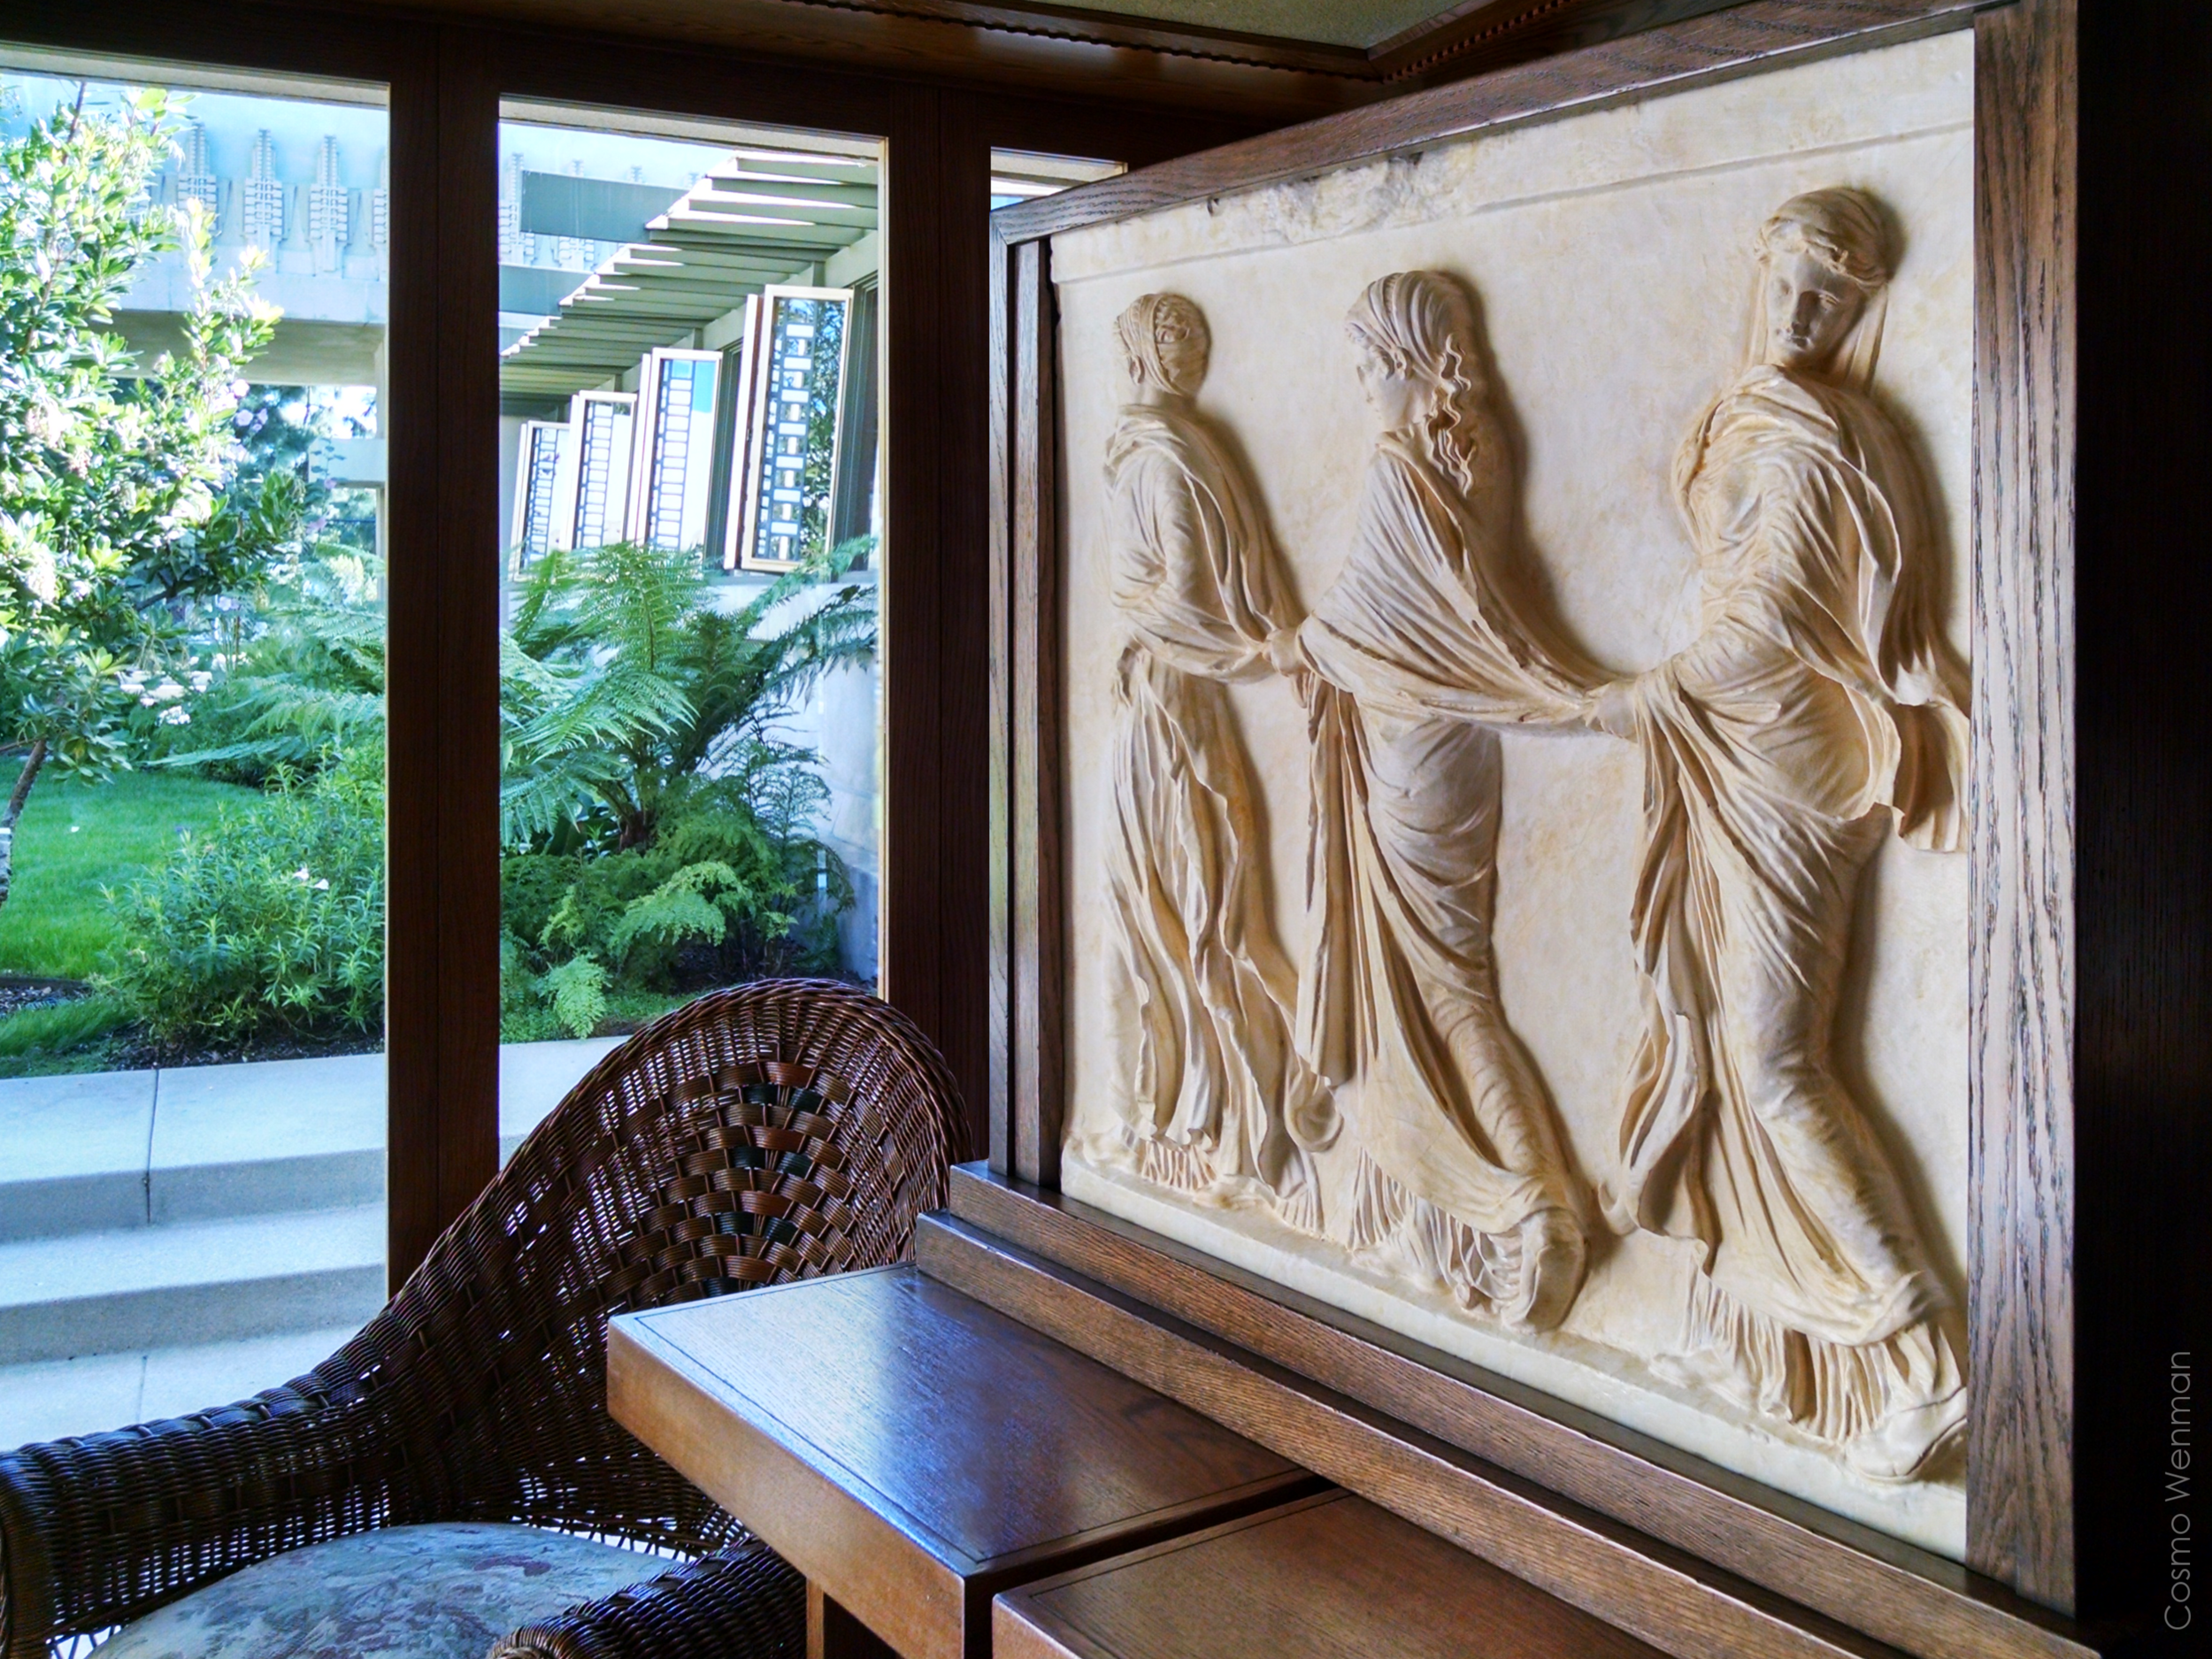   Concept Realizations' final replica, installed at Hollyhock House  